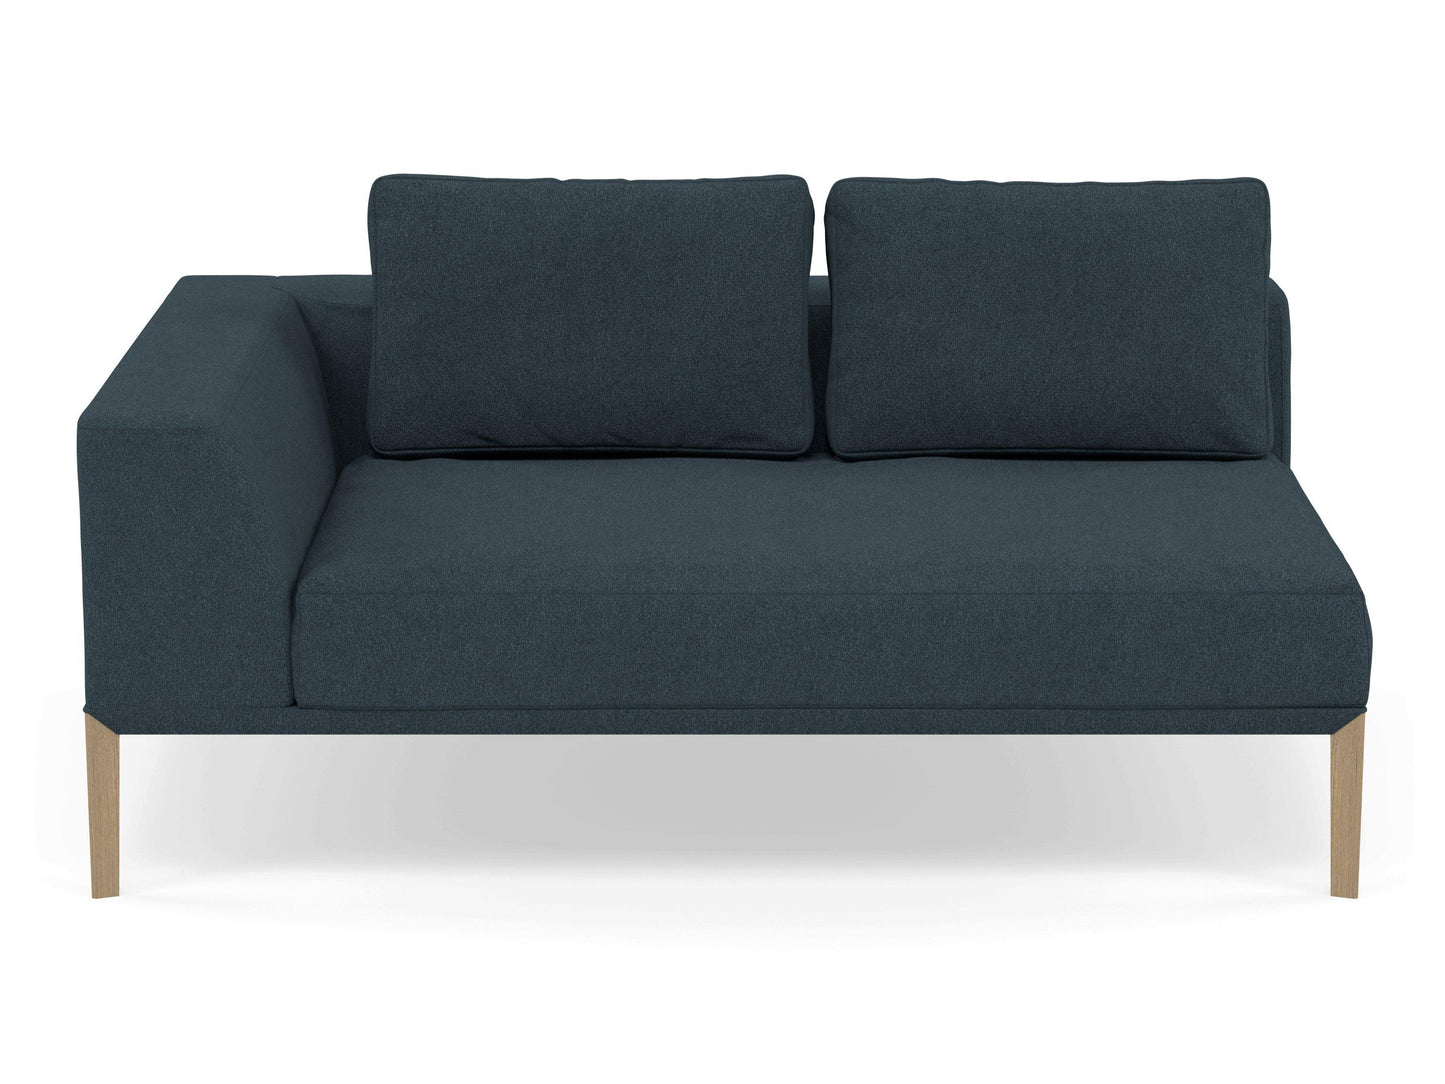 Modern 2 Seater Chaise Lounge Style Sofa with Right Armrest in Denim Blue Fabric-Natural Oak-Distinct Designs (London) Ltd